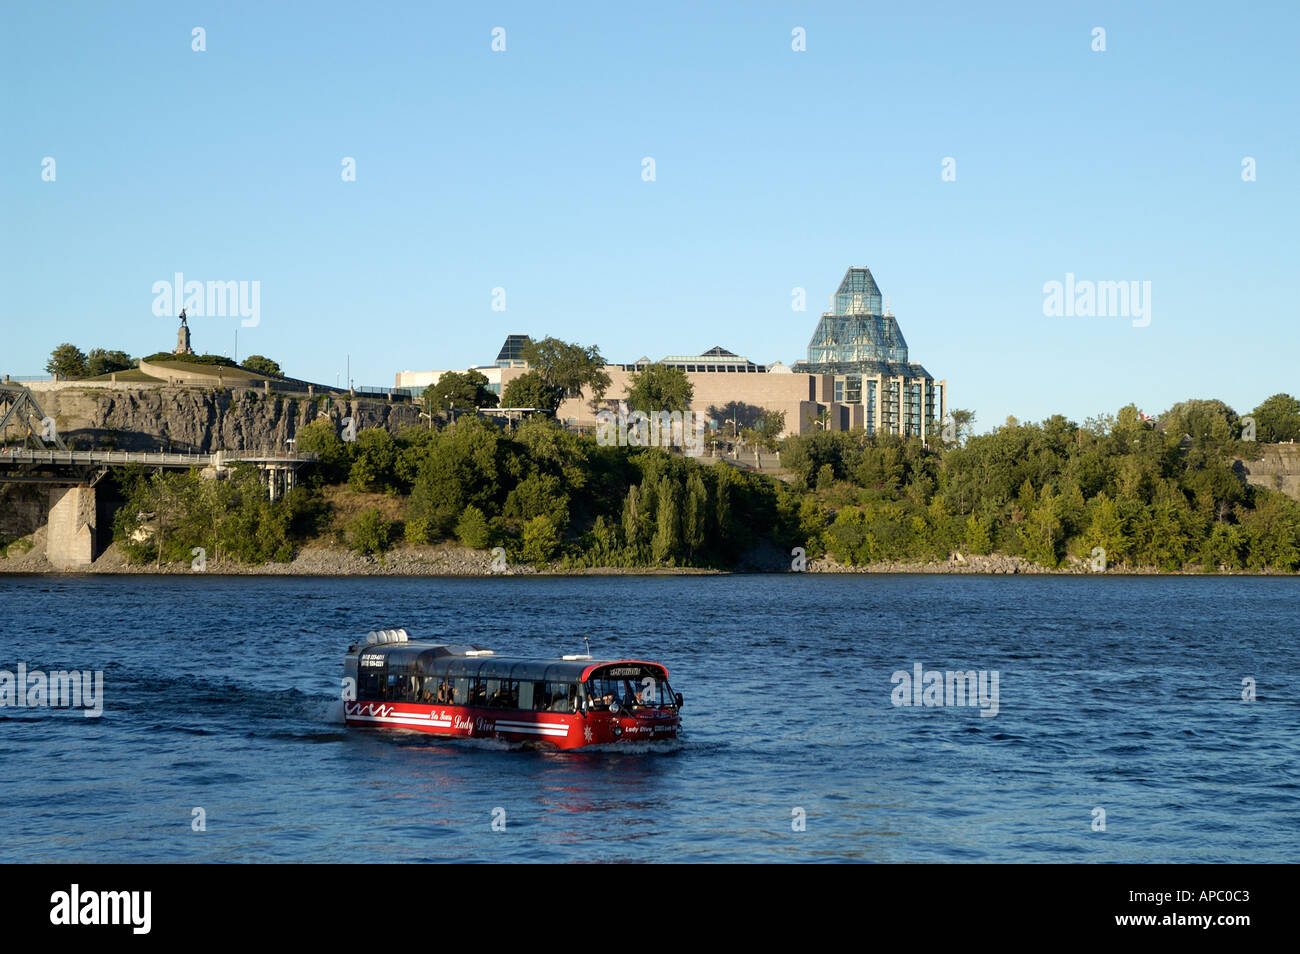 Amphibus on the Ottawa River near National Gallery of Canada museum Stock Photo